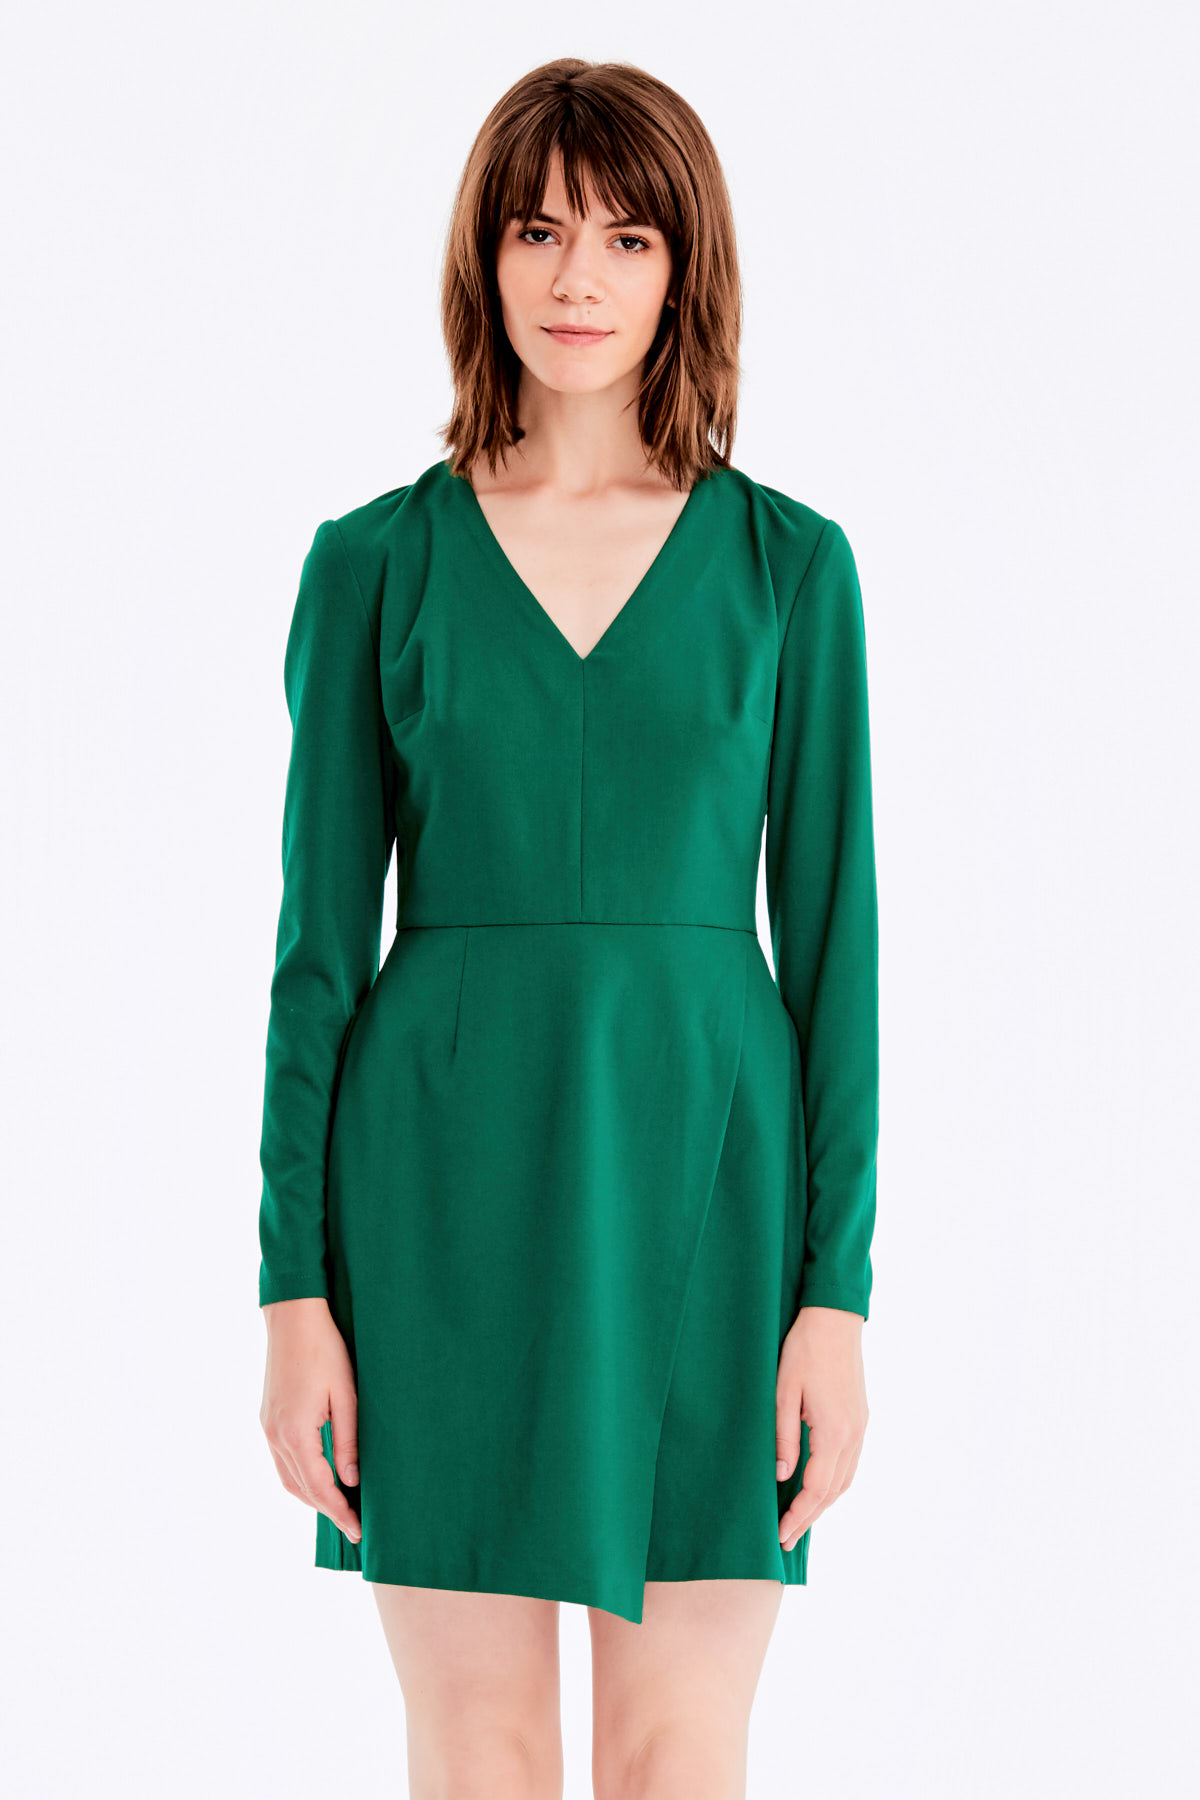 Wrap V-neck MustHave green dress , photo 2